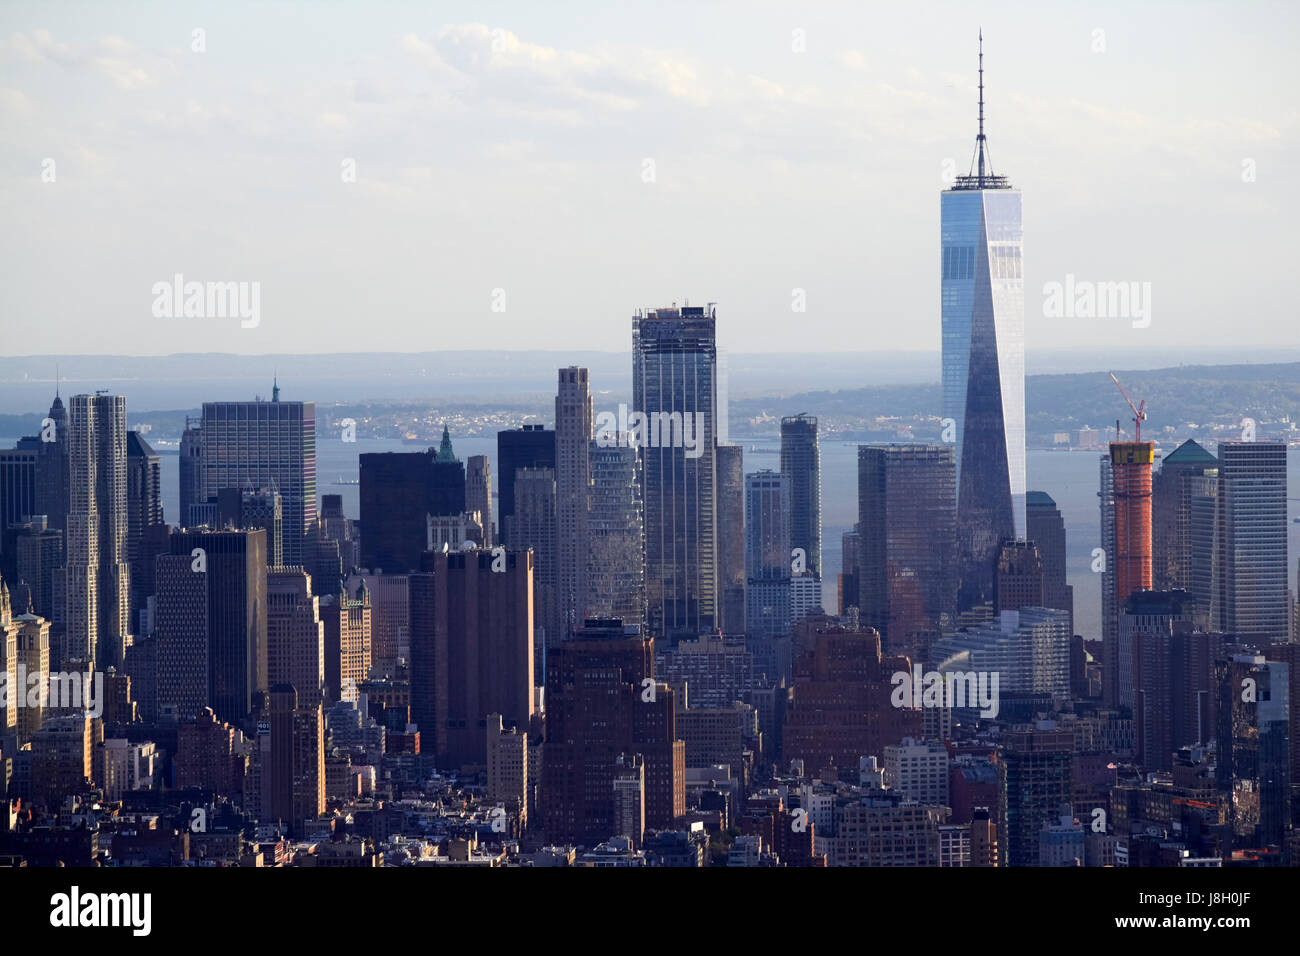 view of lower manhattan with one world trade center tower and financial district skyline New York City USA Stock Photo